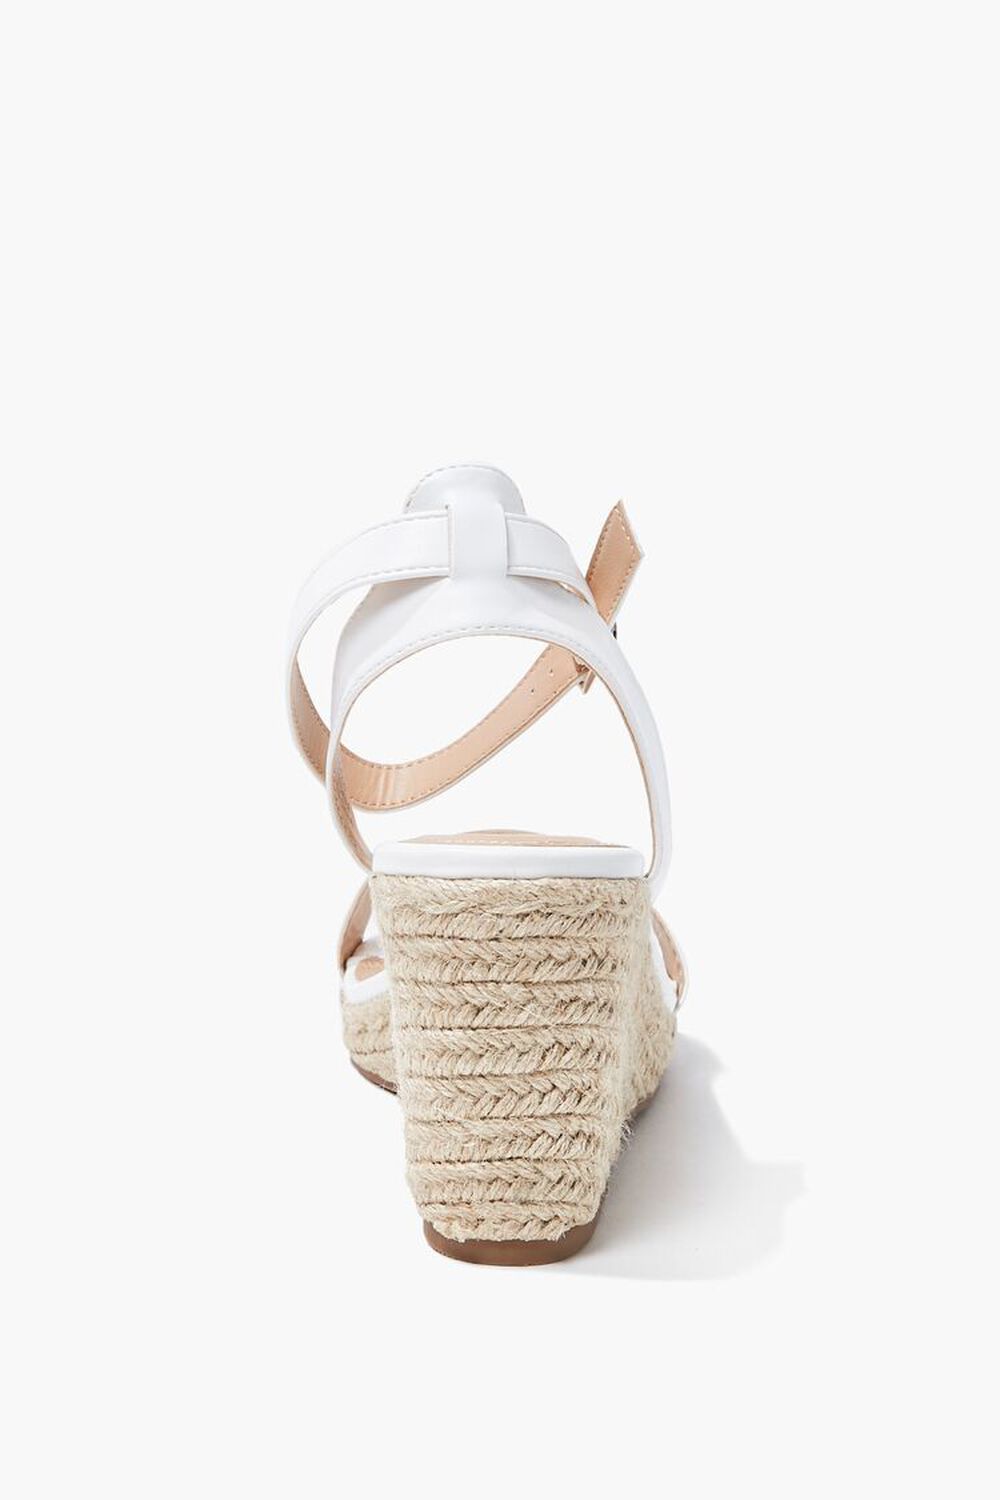 WHITE Single-Strap Espadrille Wedges (Wide), image 3